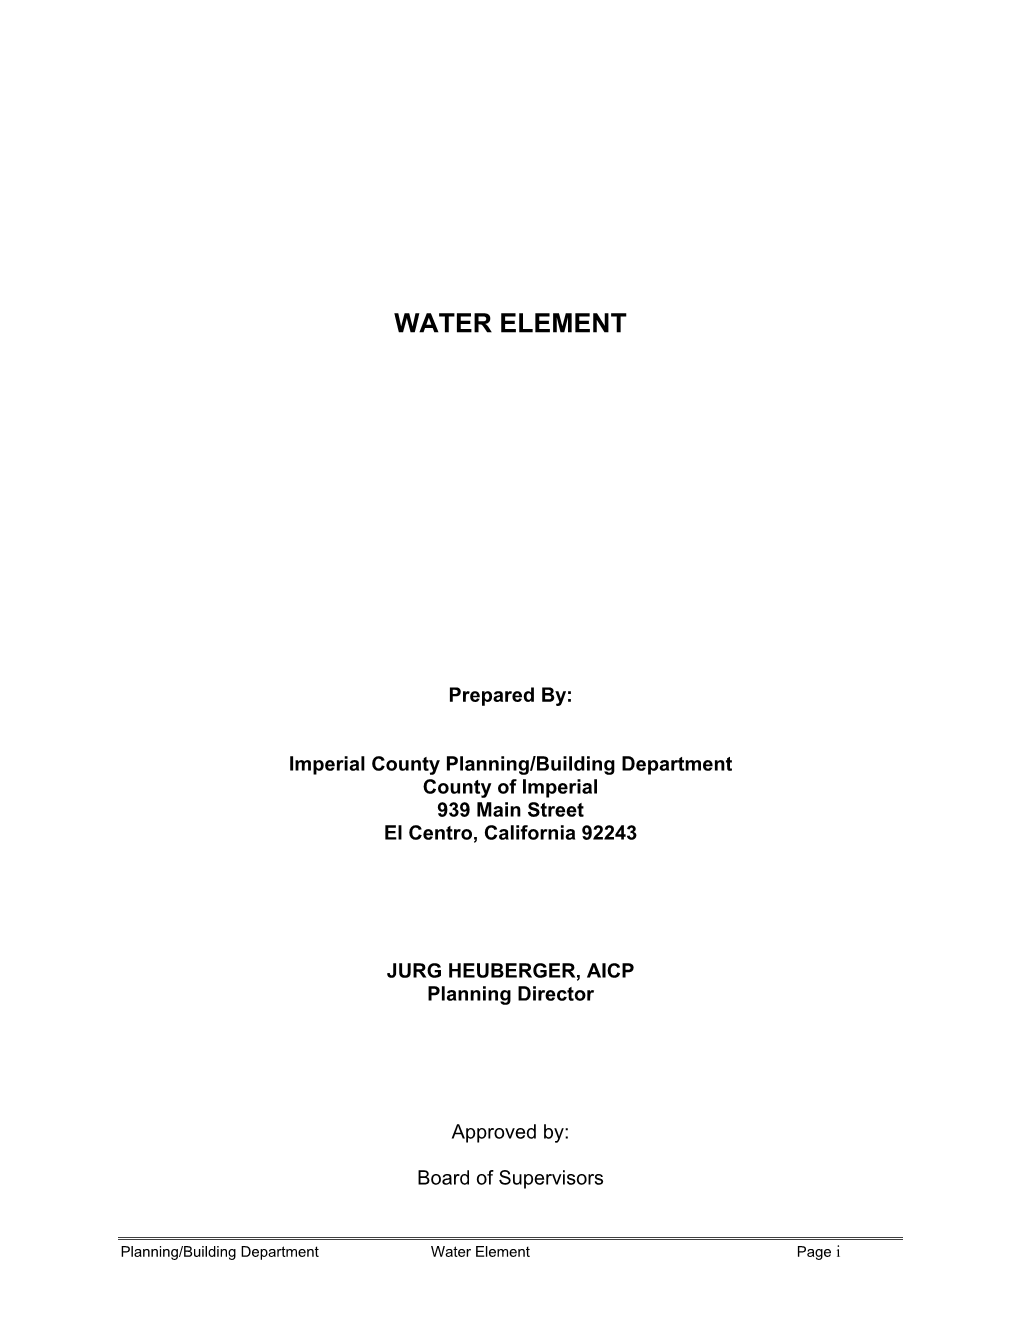 Read the Full Water Element Document